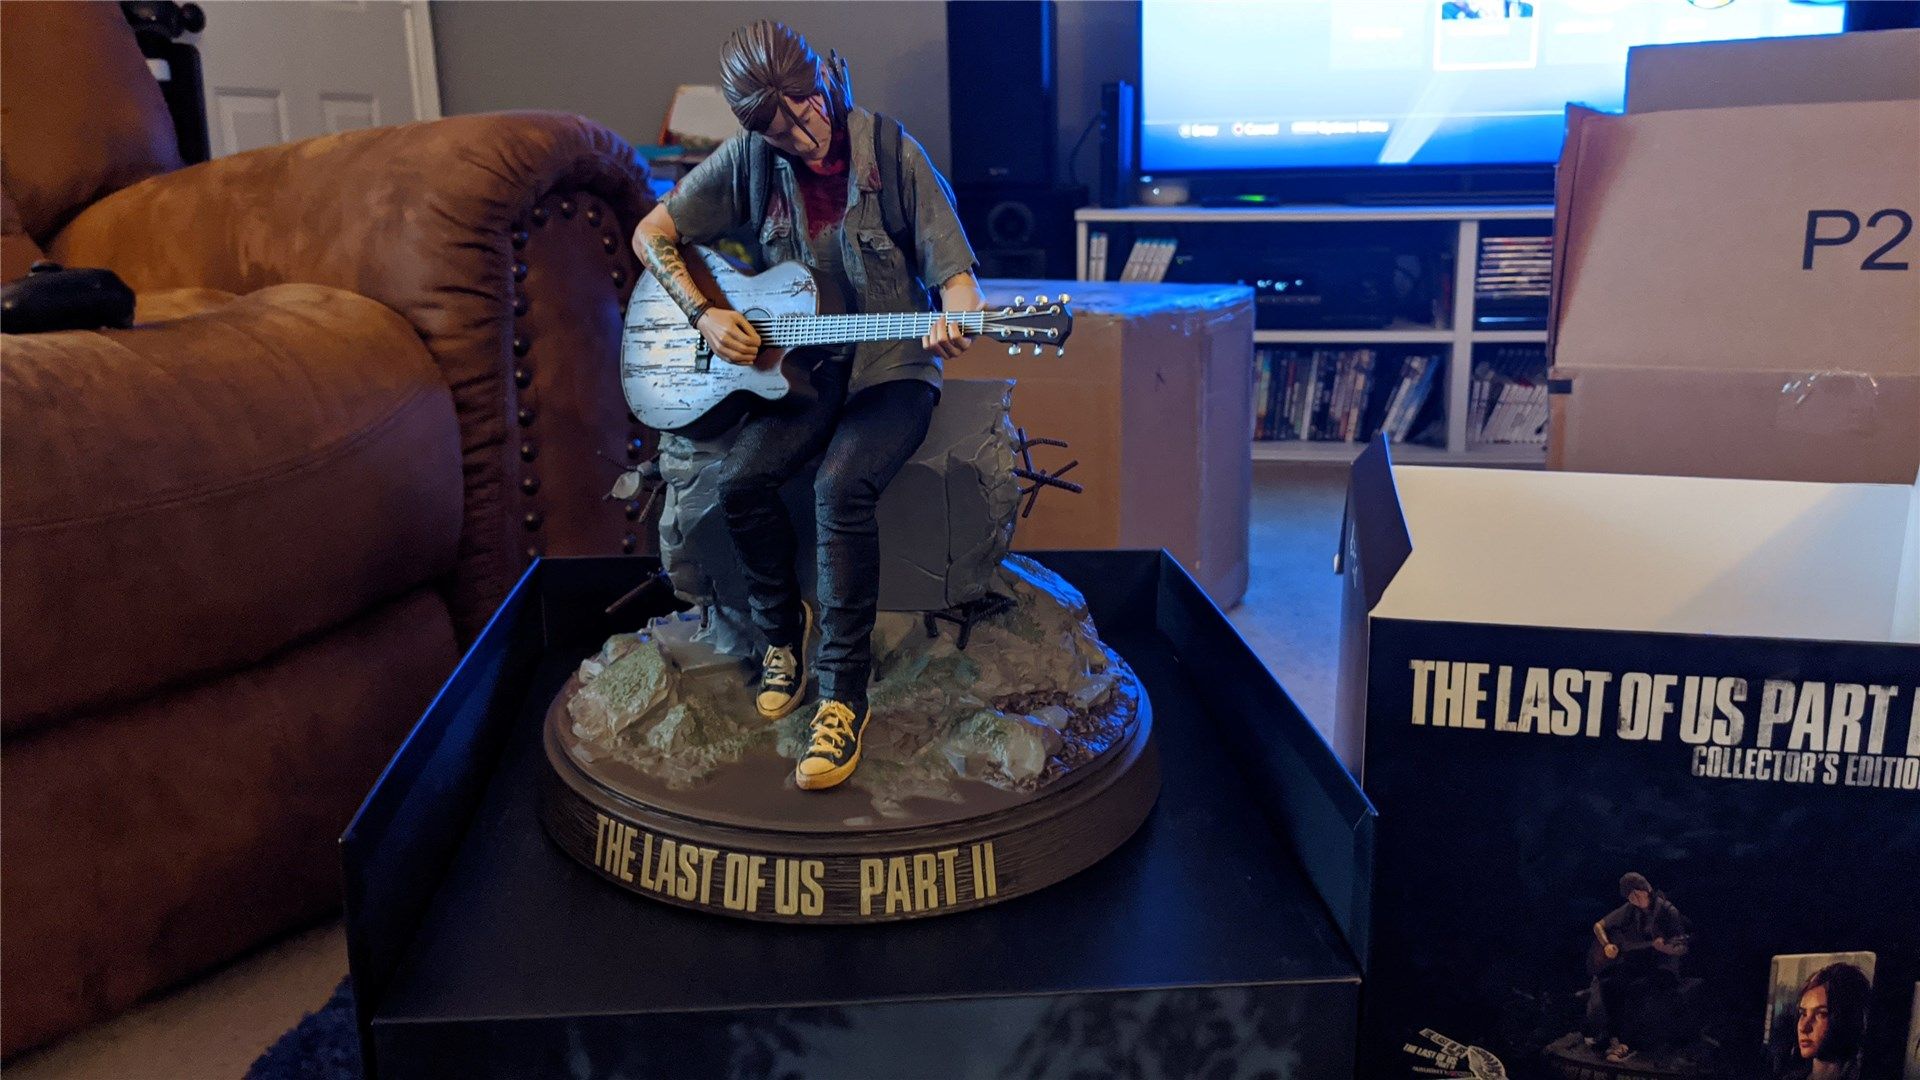 A look at the Ellie statue from The Last of Us Part II Collector's Edition